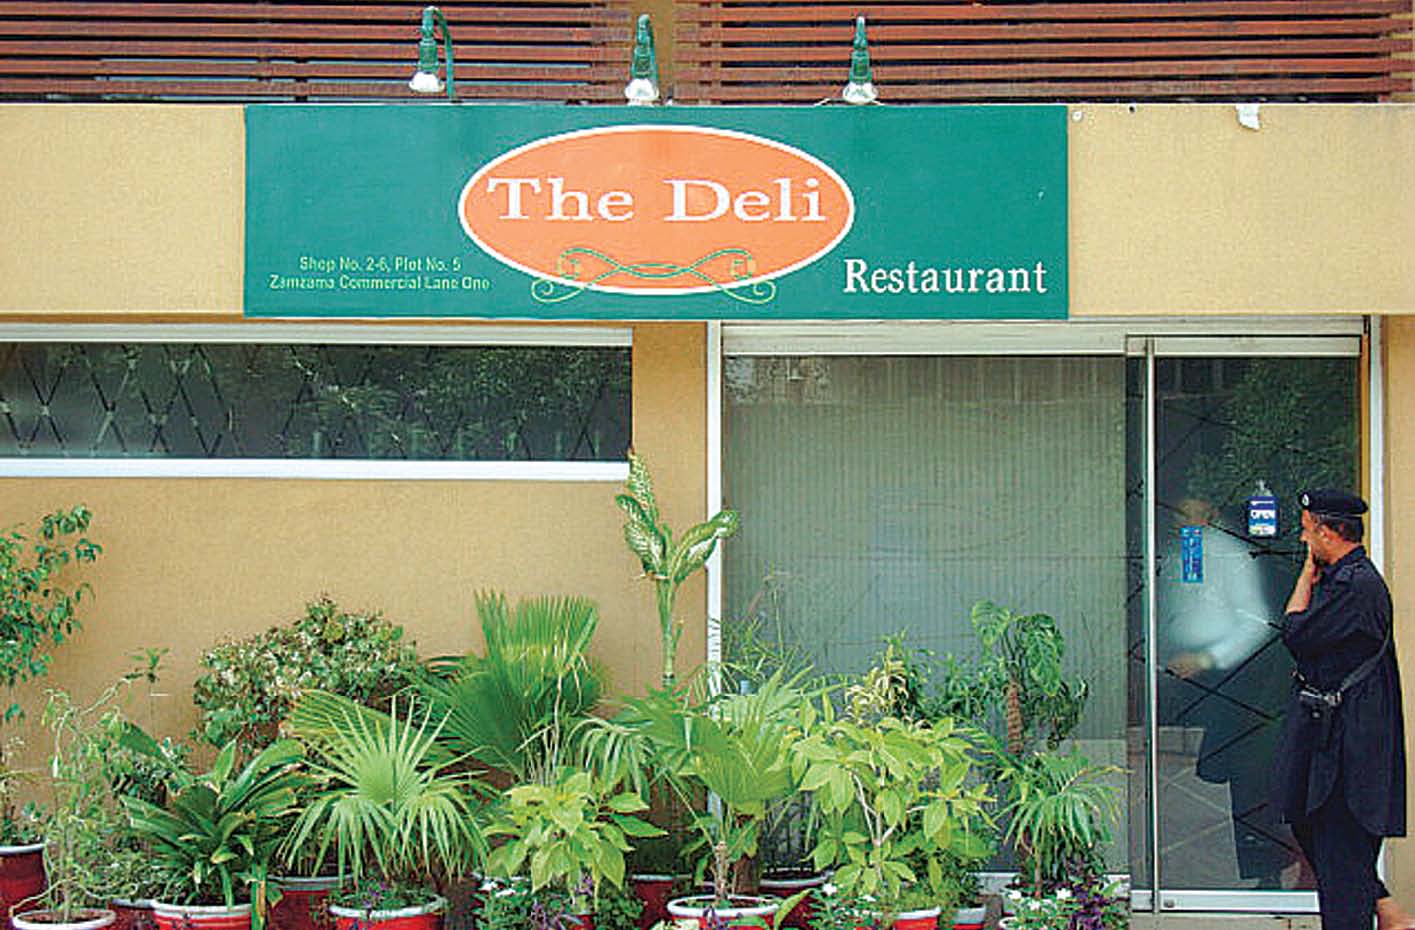 The Deli: Serving up fresh and healthy